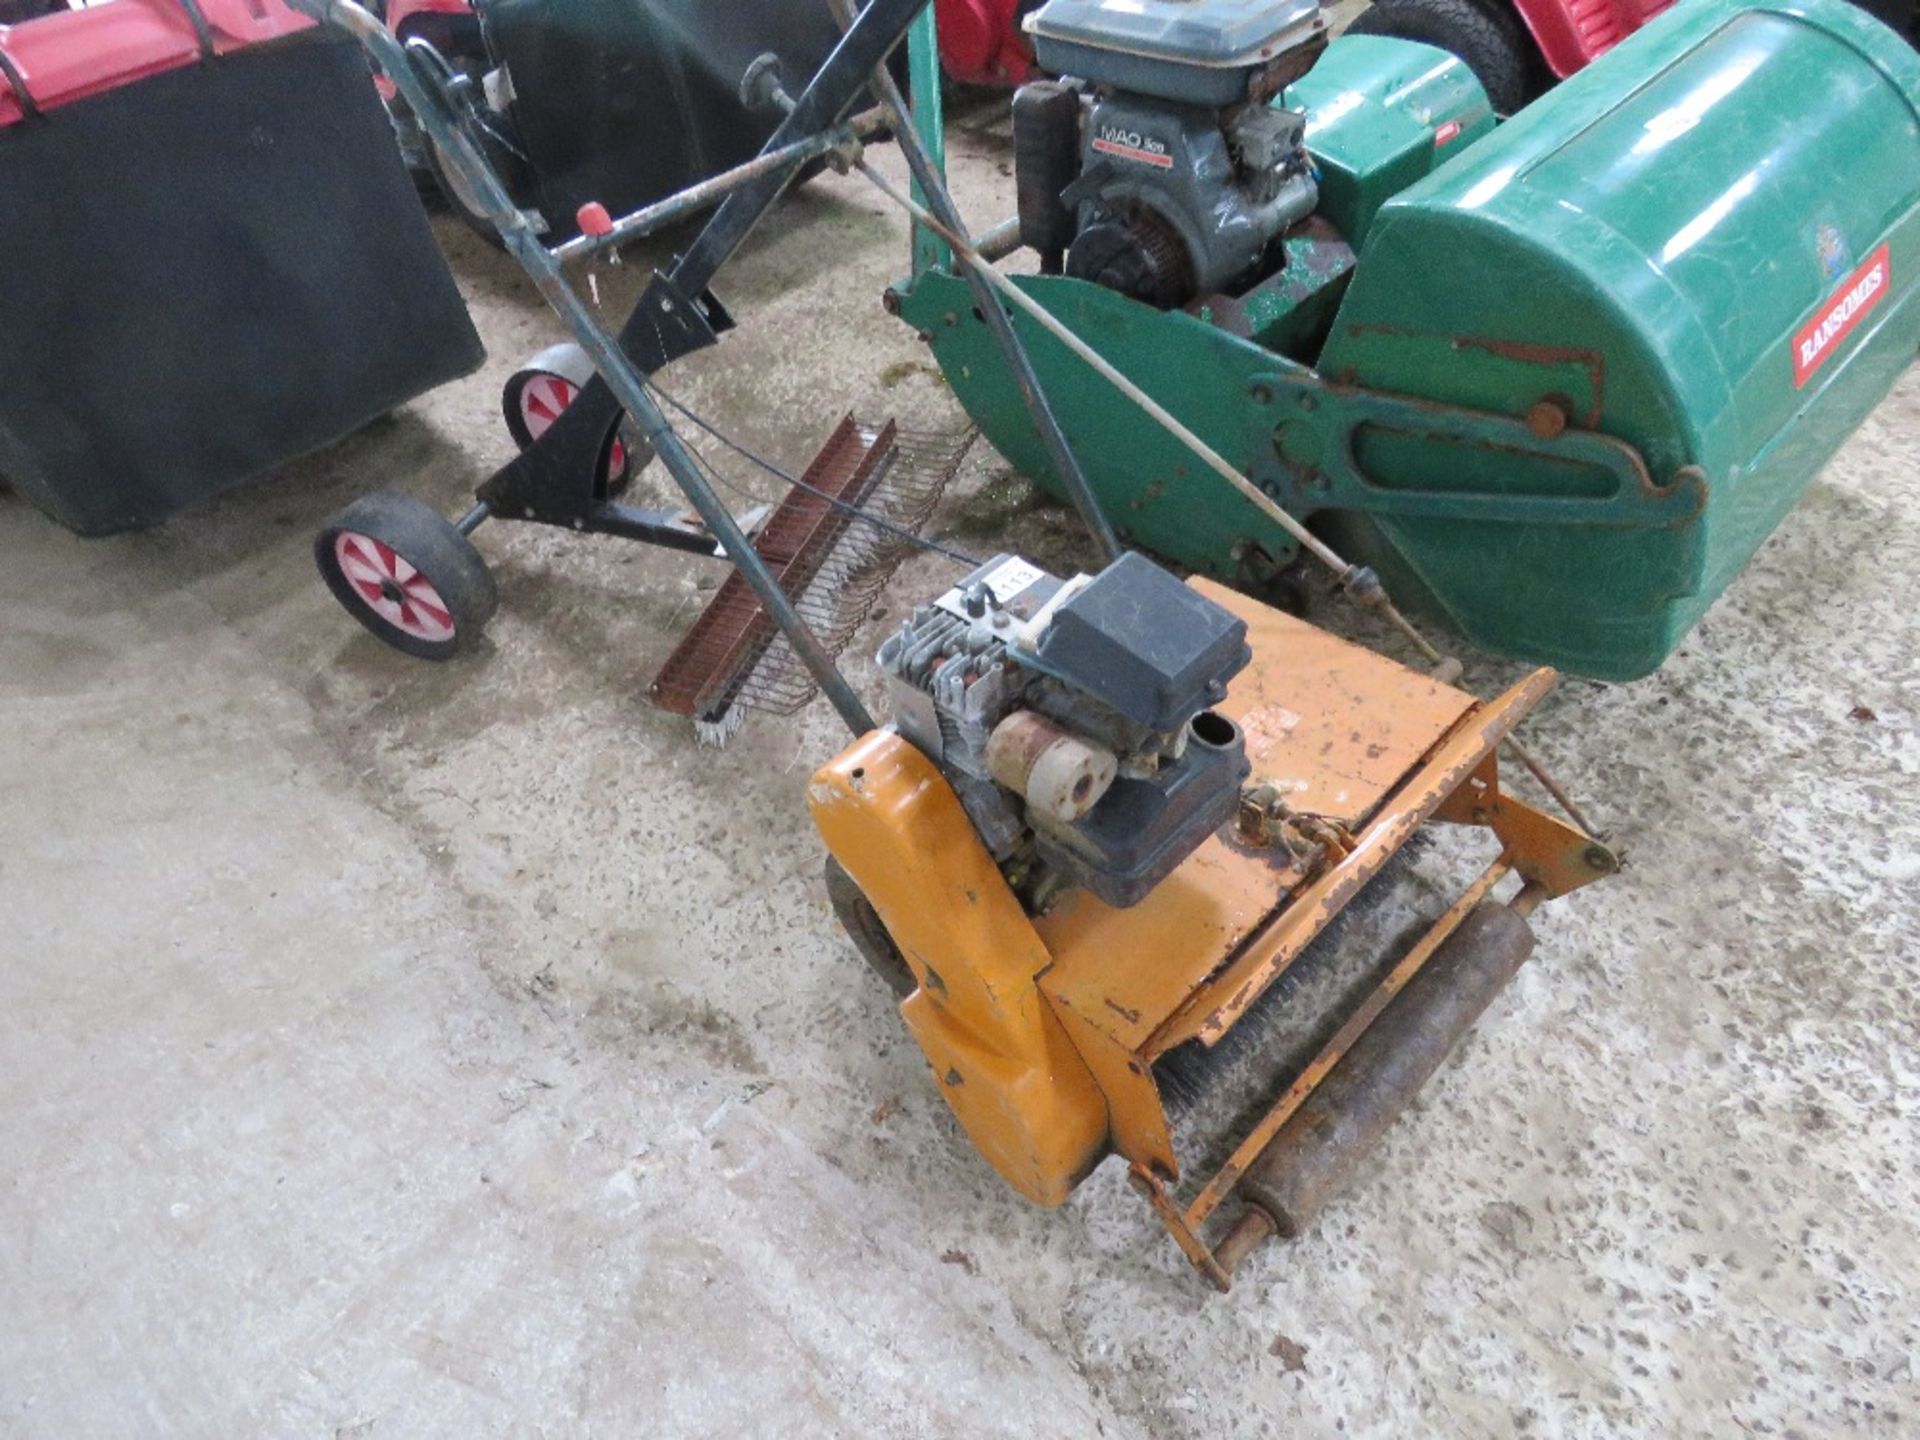 SISIS PETROL ENGINED POWER SWEEPER PLUS A PUSH ALONG GROOMER. DIRECT FROM SPORTS GROUND.....THIS LOT - Image 2 of 7